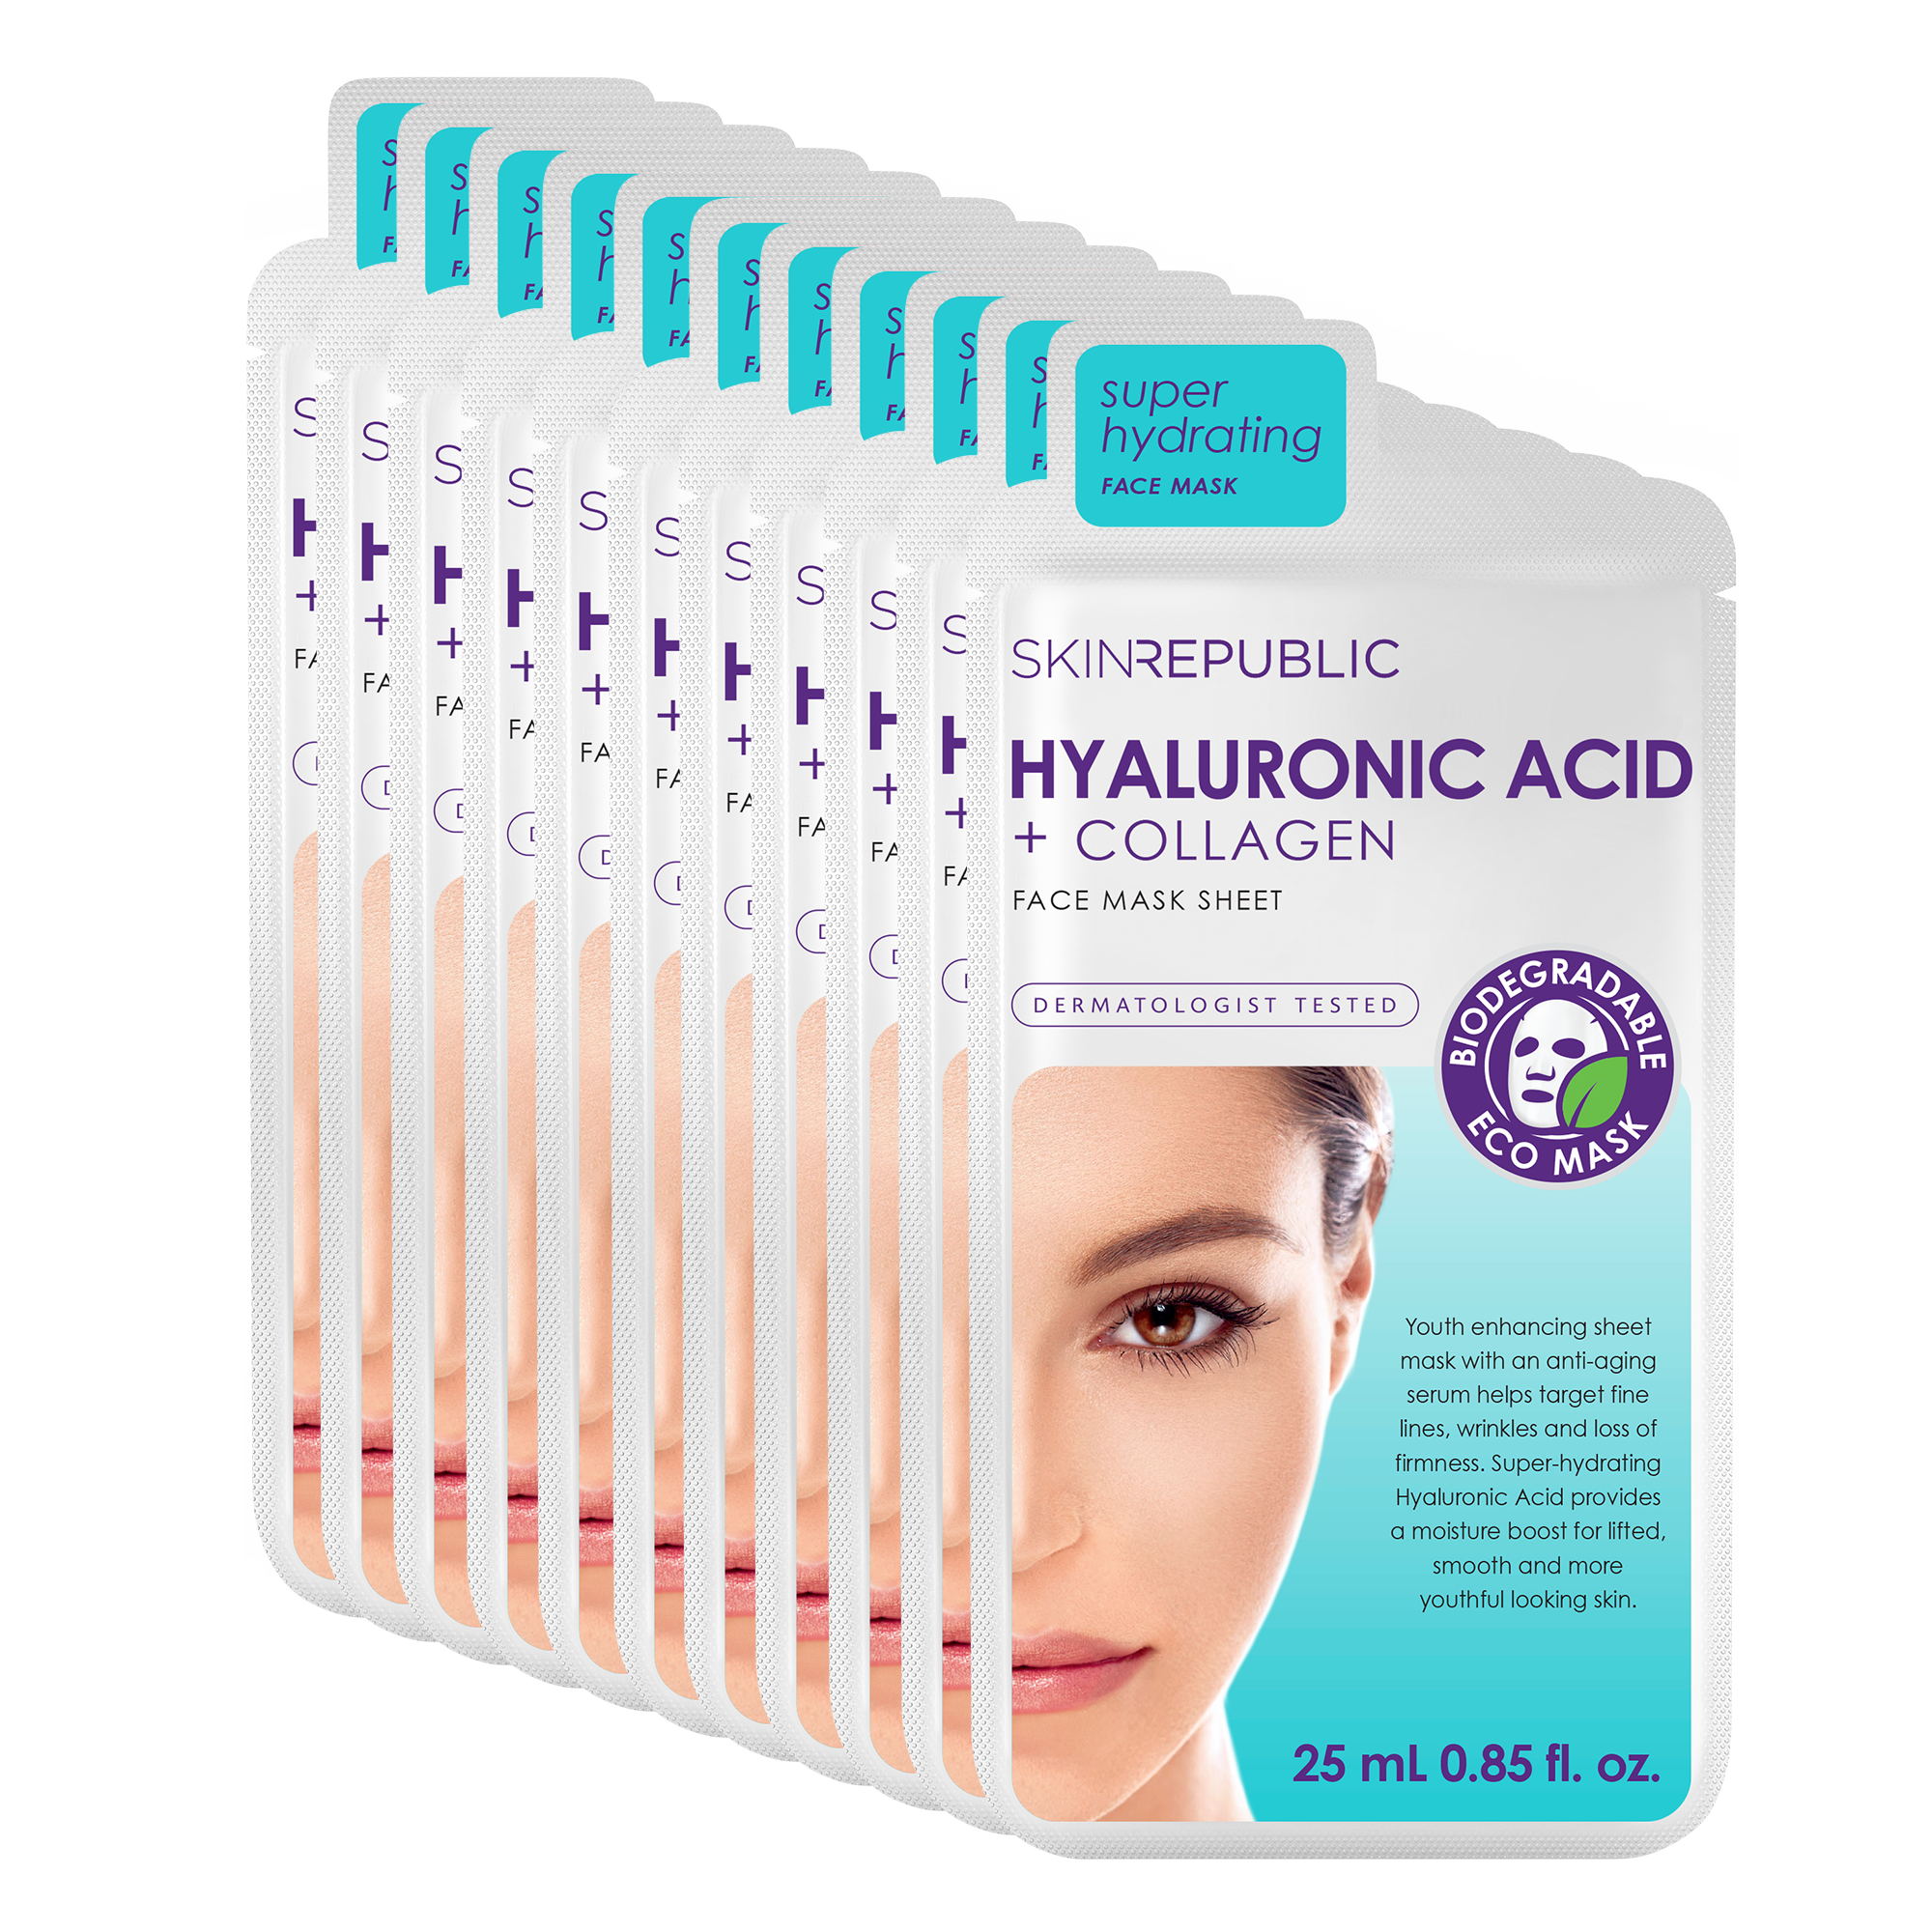 Pack of 10 - Hyaluronic Acid + Collagen facial sheet mask with hyaluronic acid